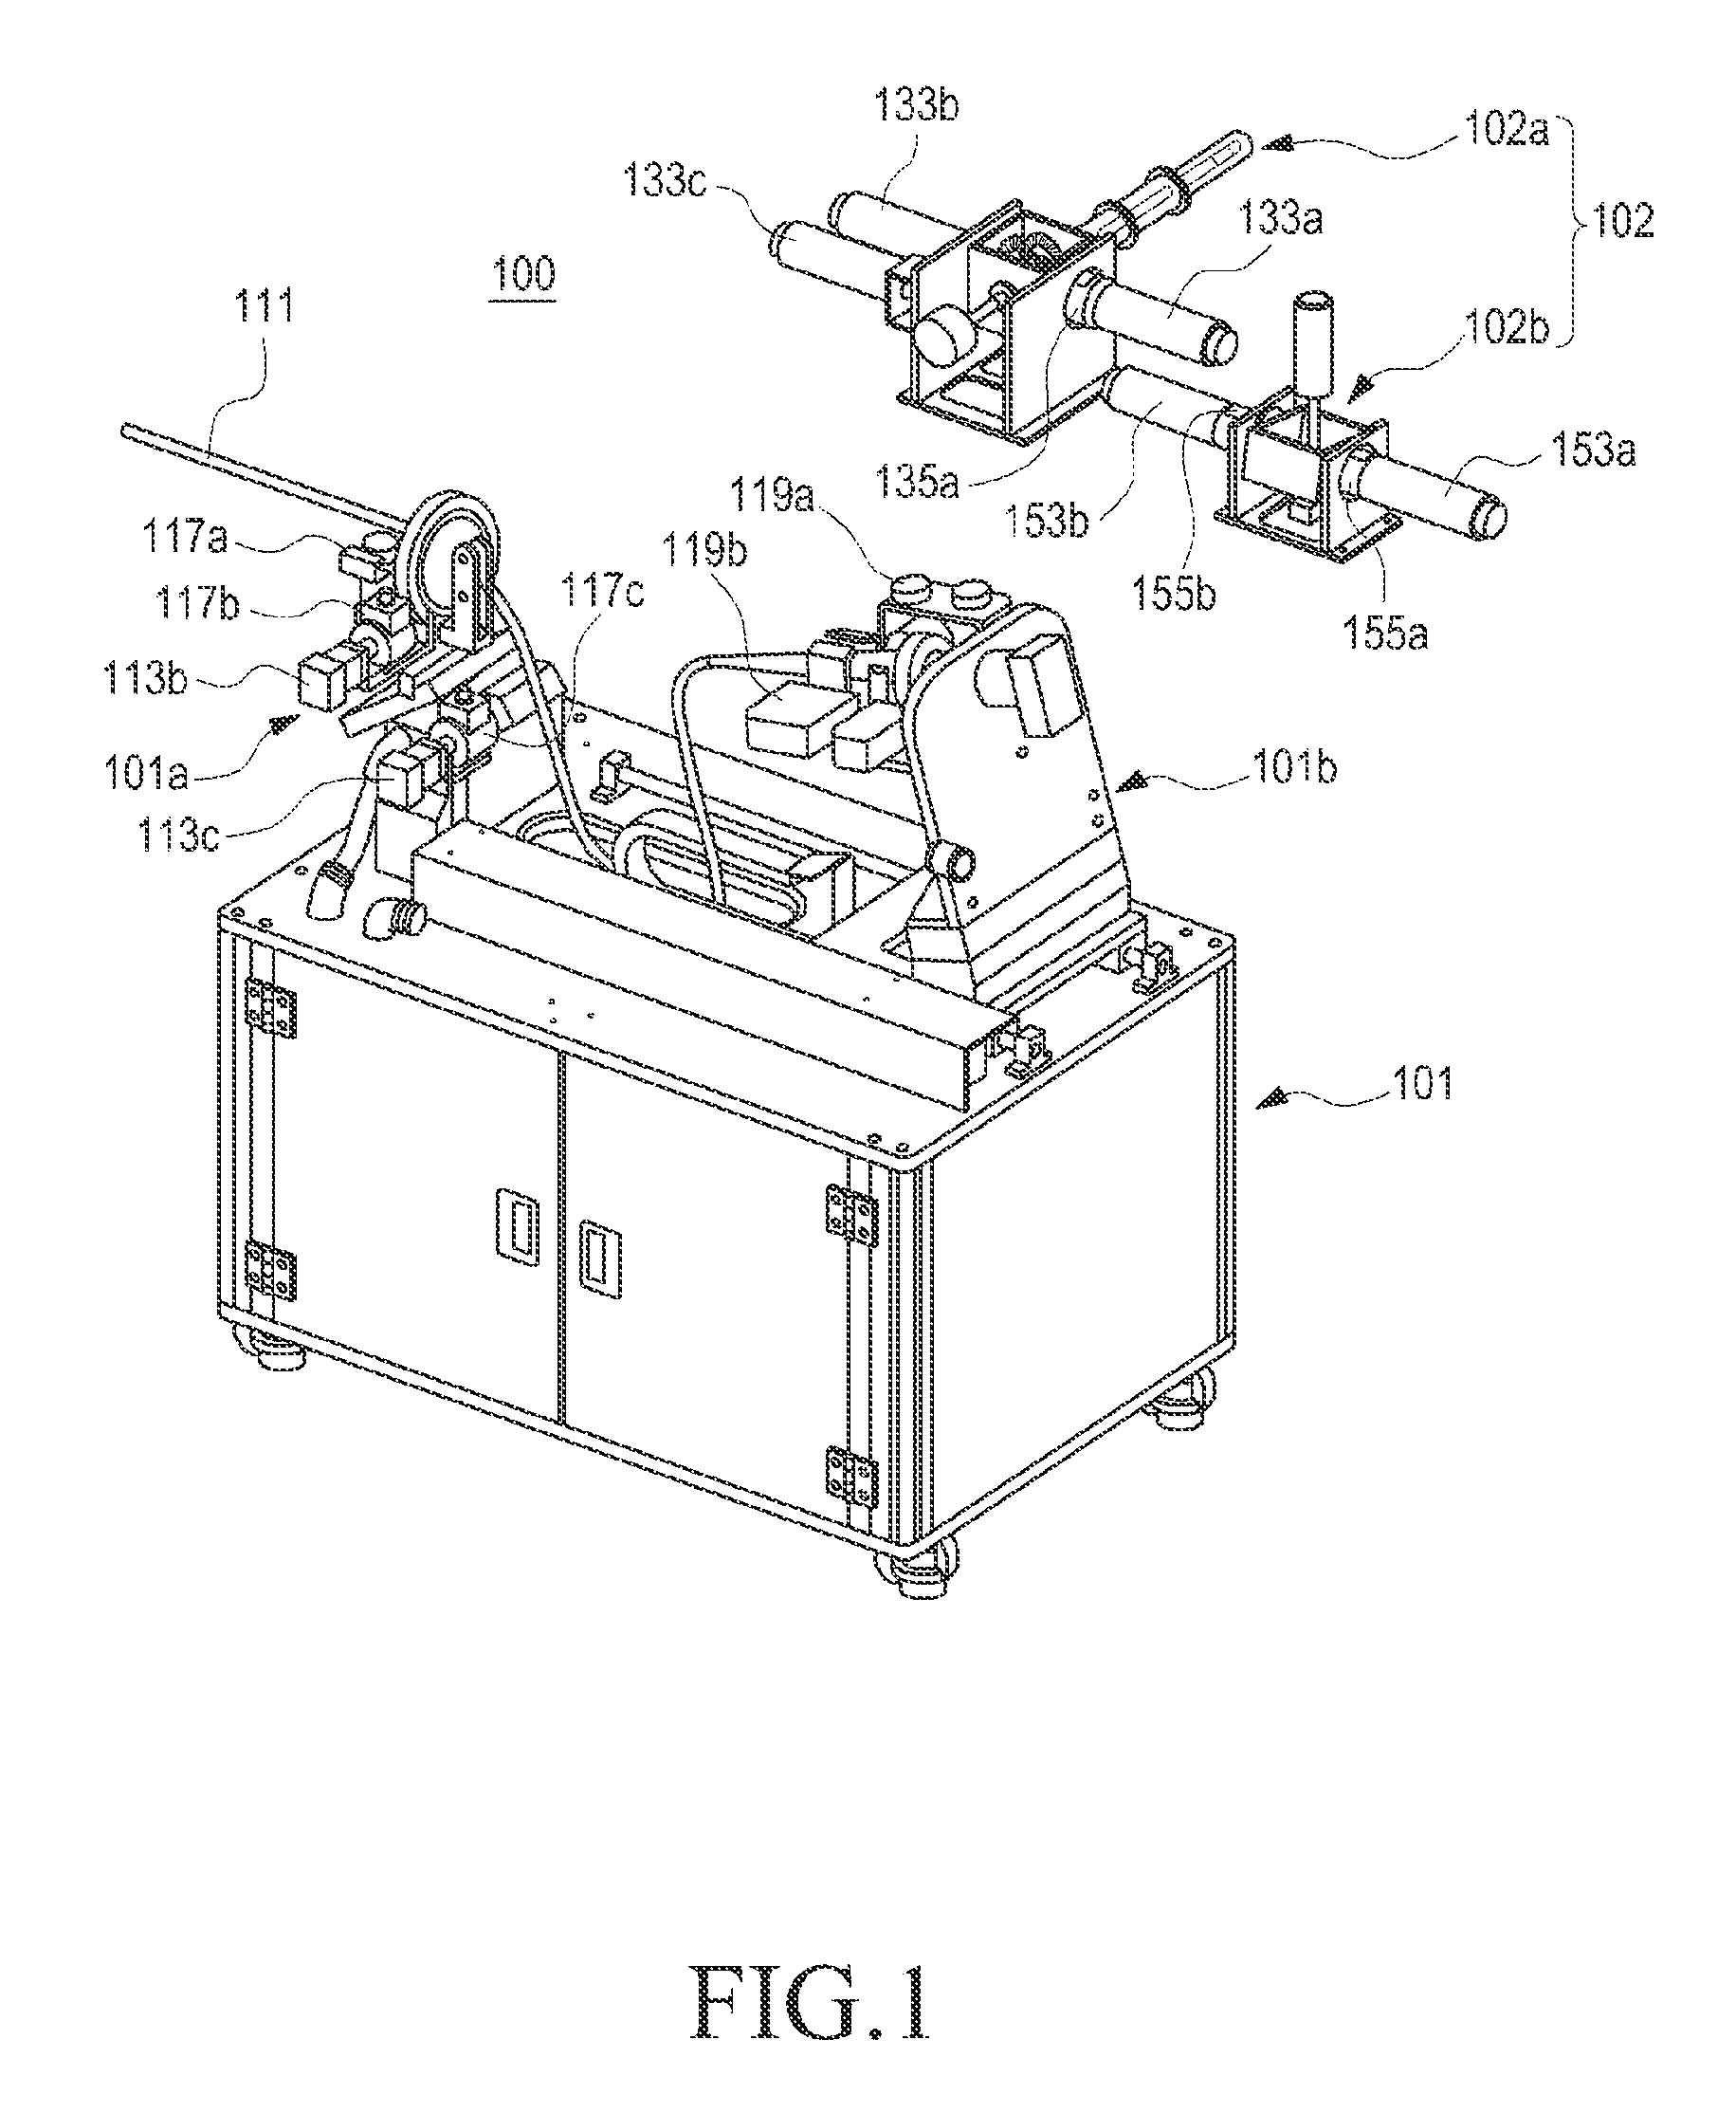 Endoscope apparatus with slave device and master device